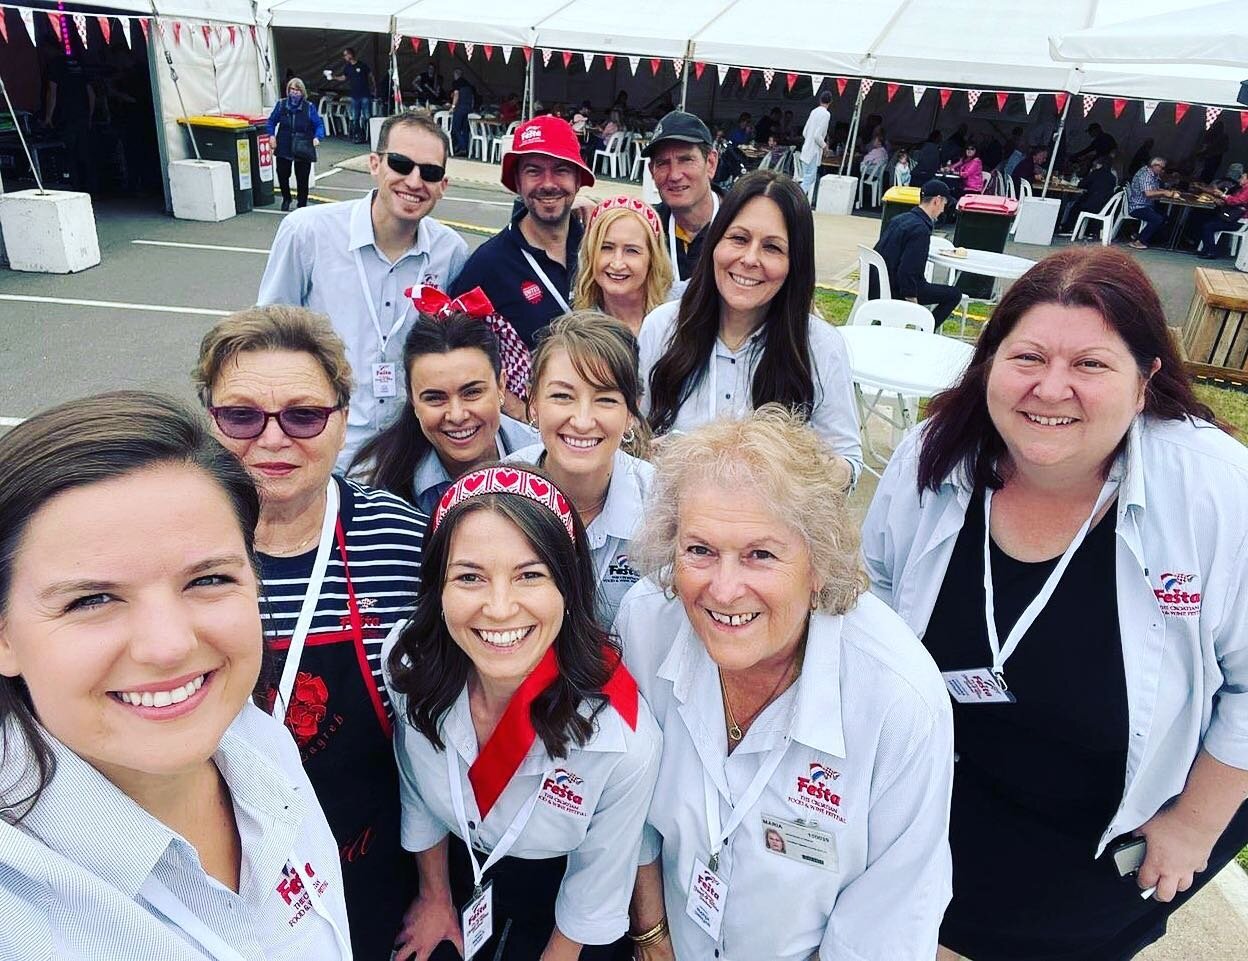 Here are the faces behind the Fe&scaron;ta organising team!!! We worked hard to put an amazing event together to showcase our amazing Croatian community and culture. It&rsquo;s time to recover!! #dreamteam #croatianfe&scaron;ta #adelaide #southaustra